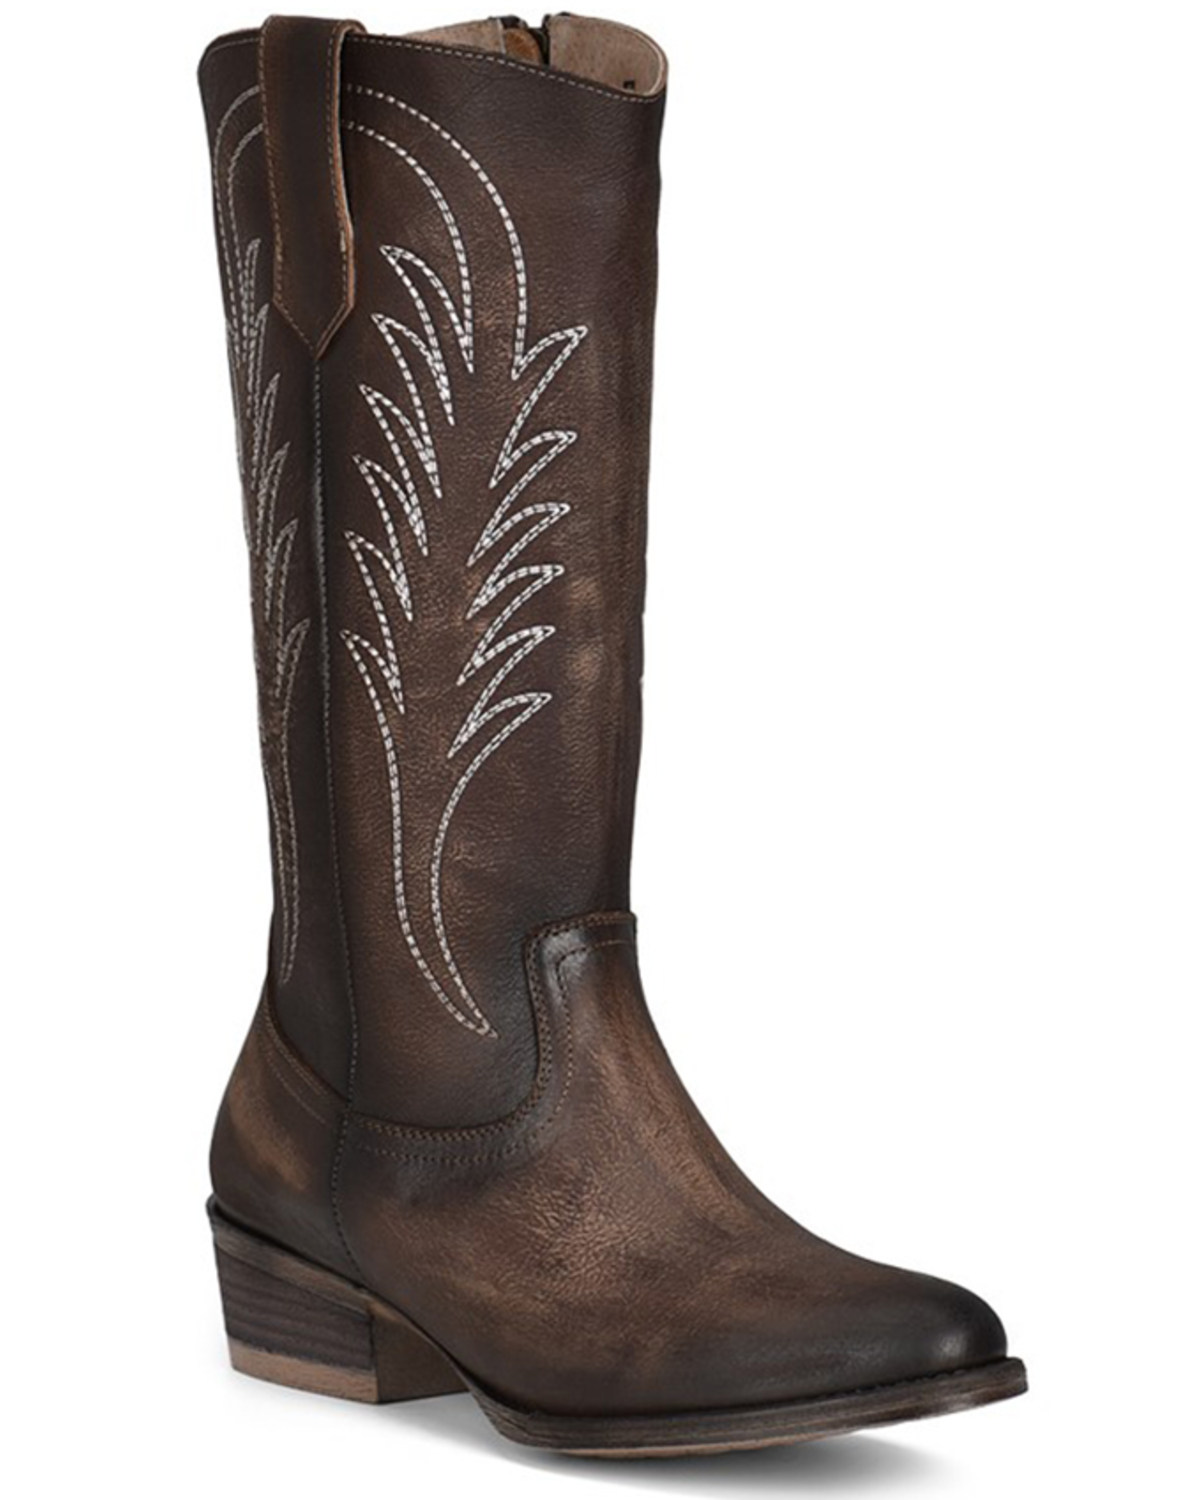 Corral Women's Tobacco Embroidery Zip Leather Western Boot - Round Toe